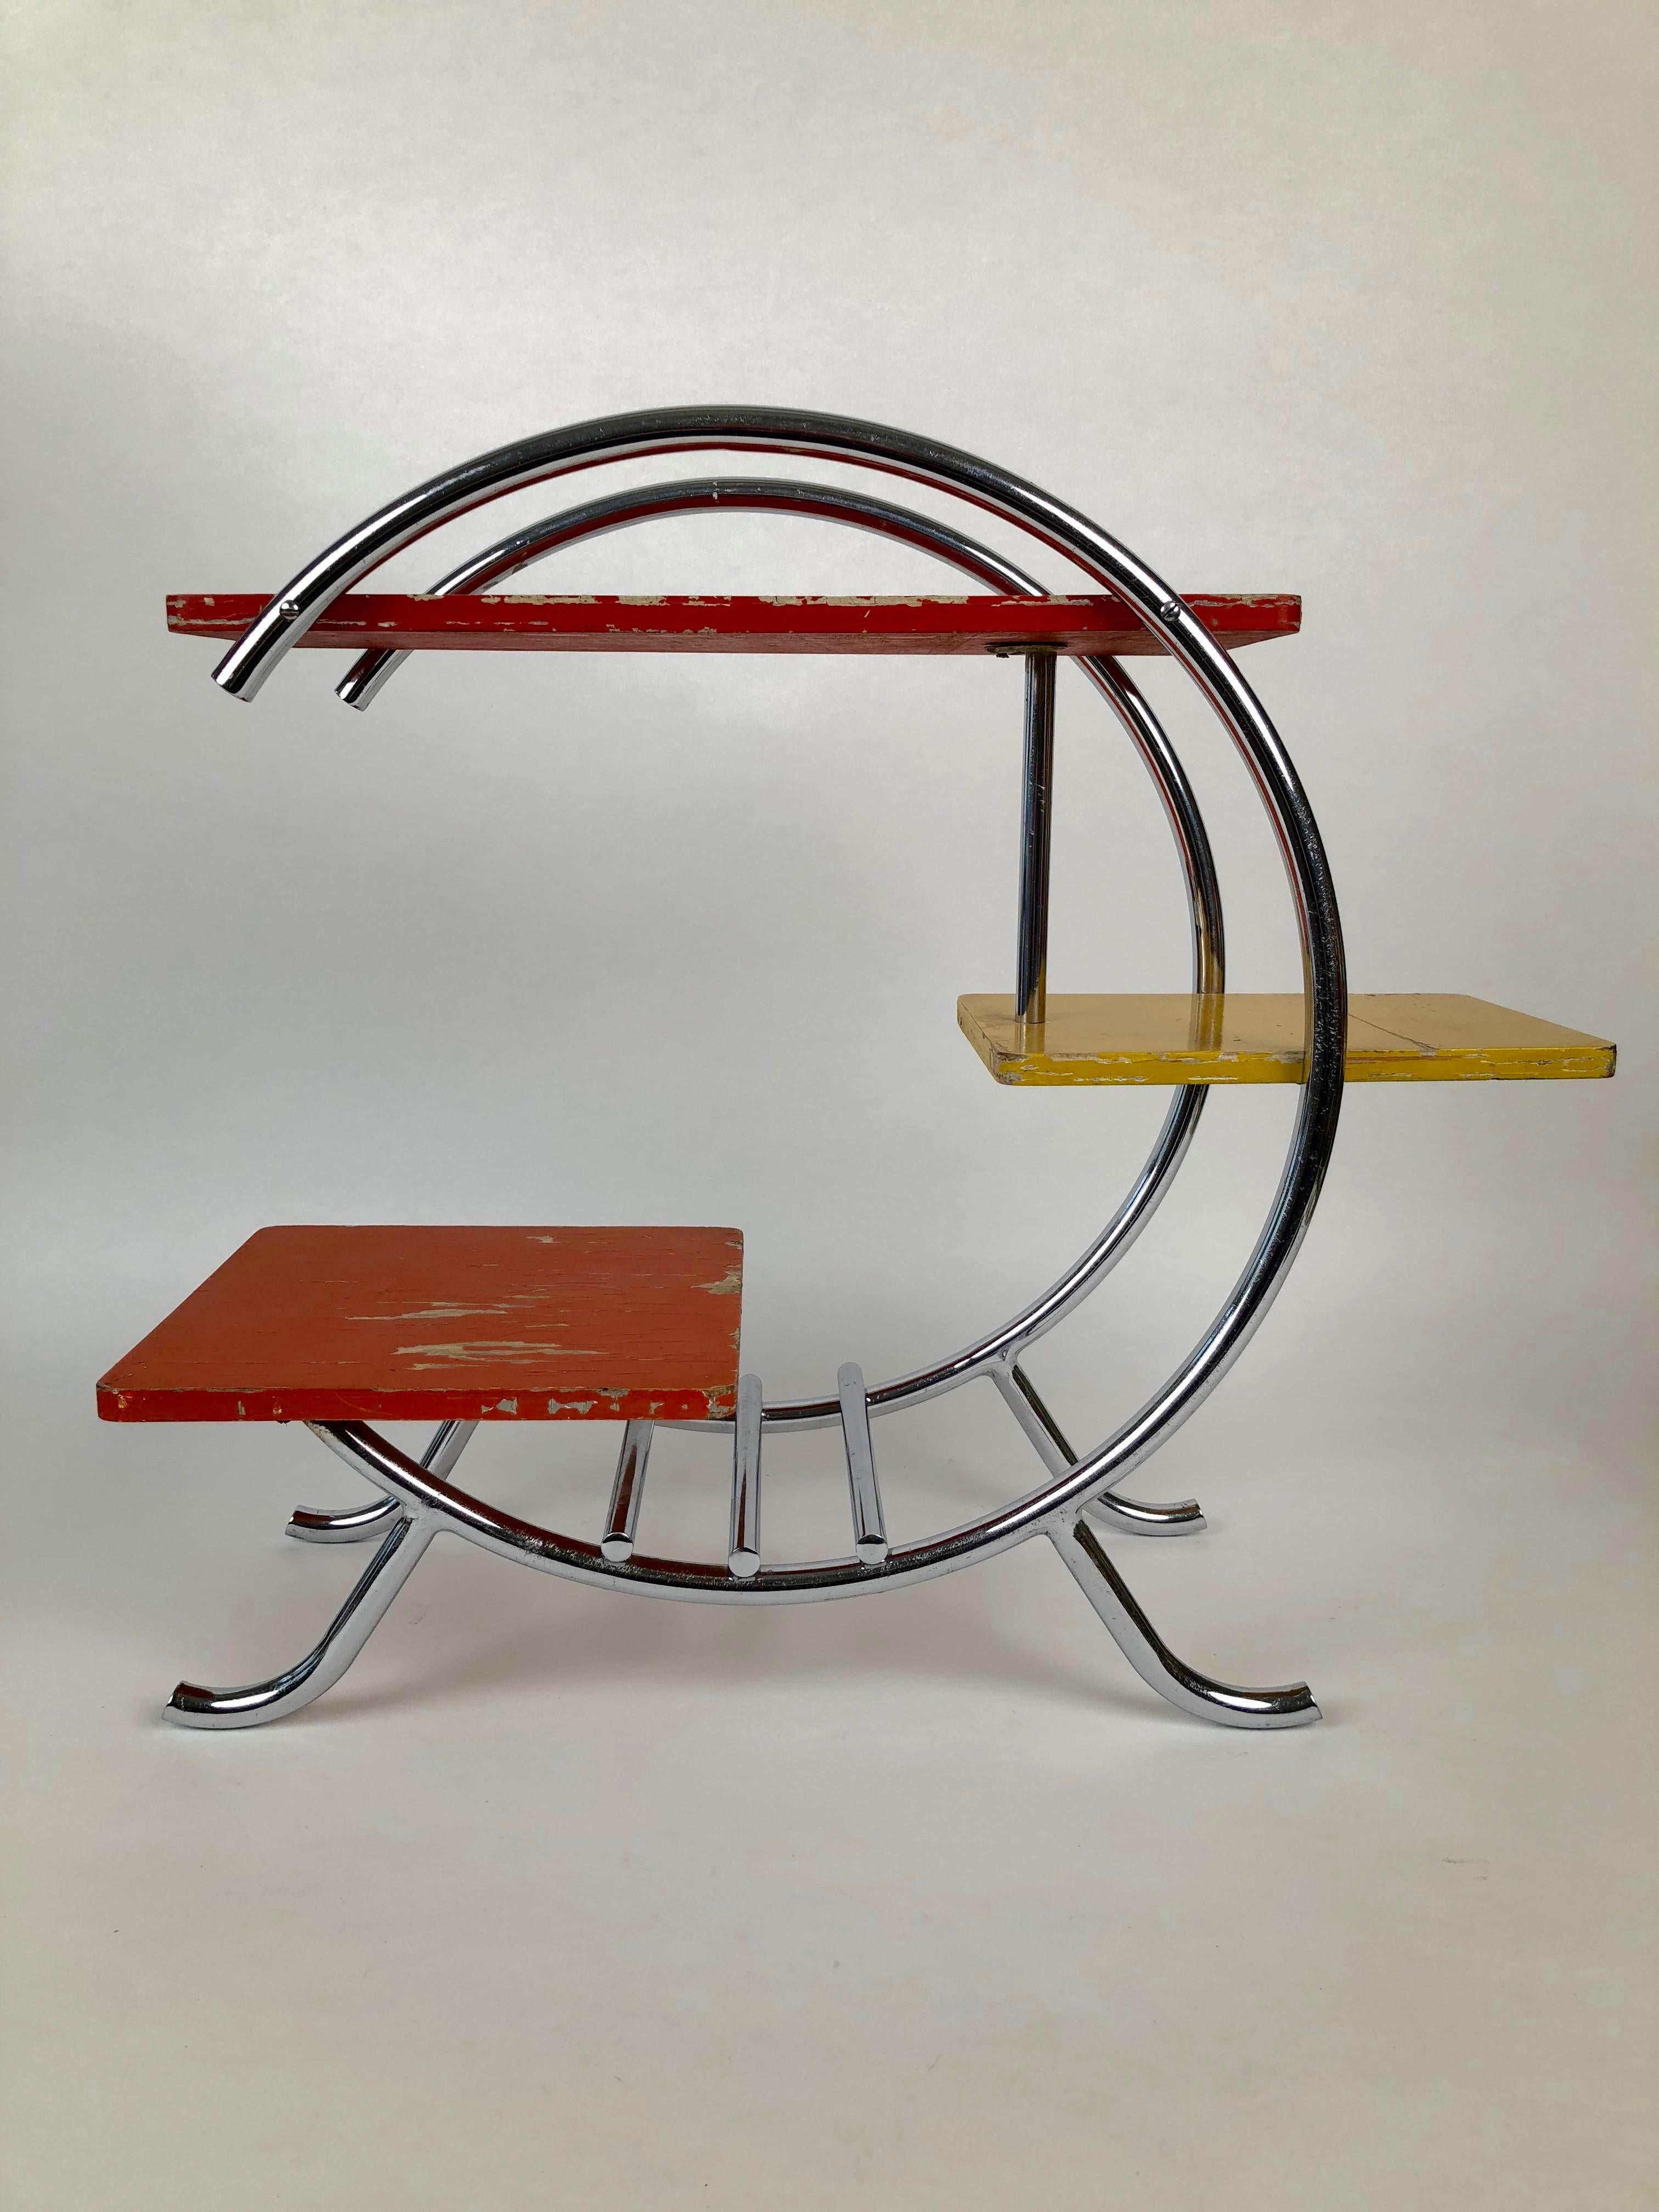 Mid-20th Century Chrome Etagere with Coral, Yellow and Red Painted Shelves in Bauhaus Style For Sale